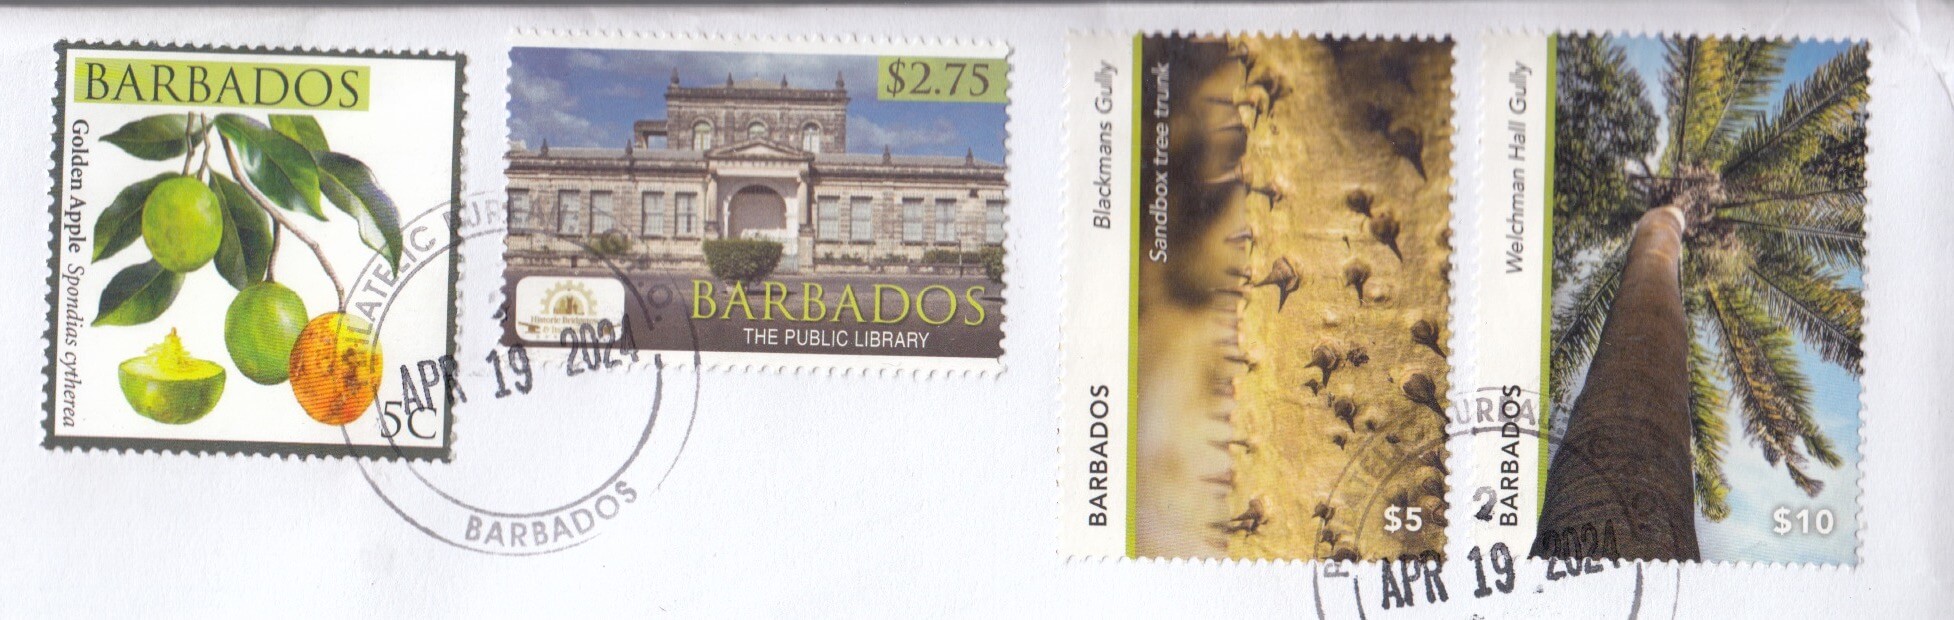 Gullies in Barbados high value definitives being used on cover with a $2.75 from the Historic Bridgetown series and a 5c Local Fruits make up rate